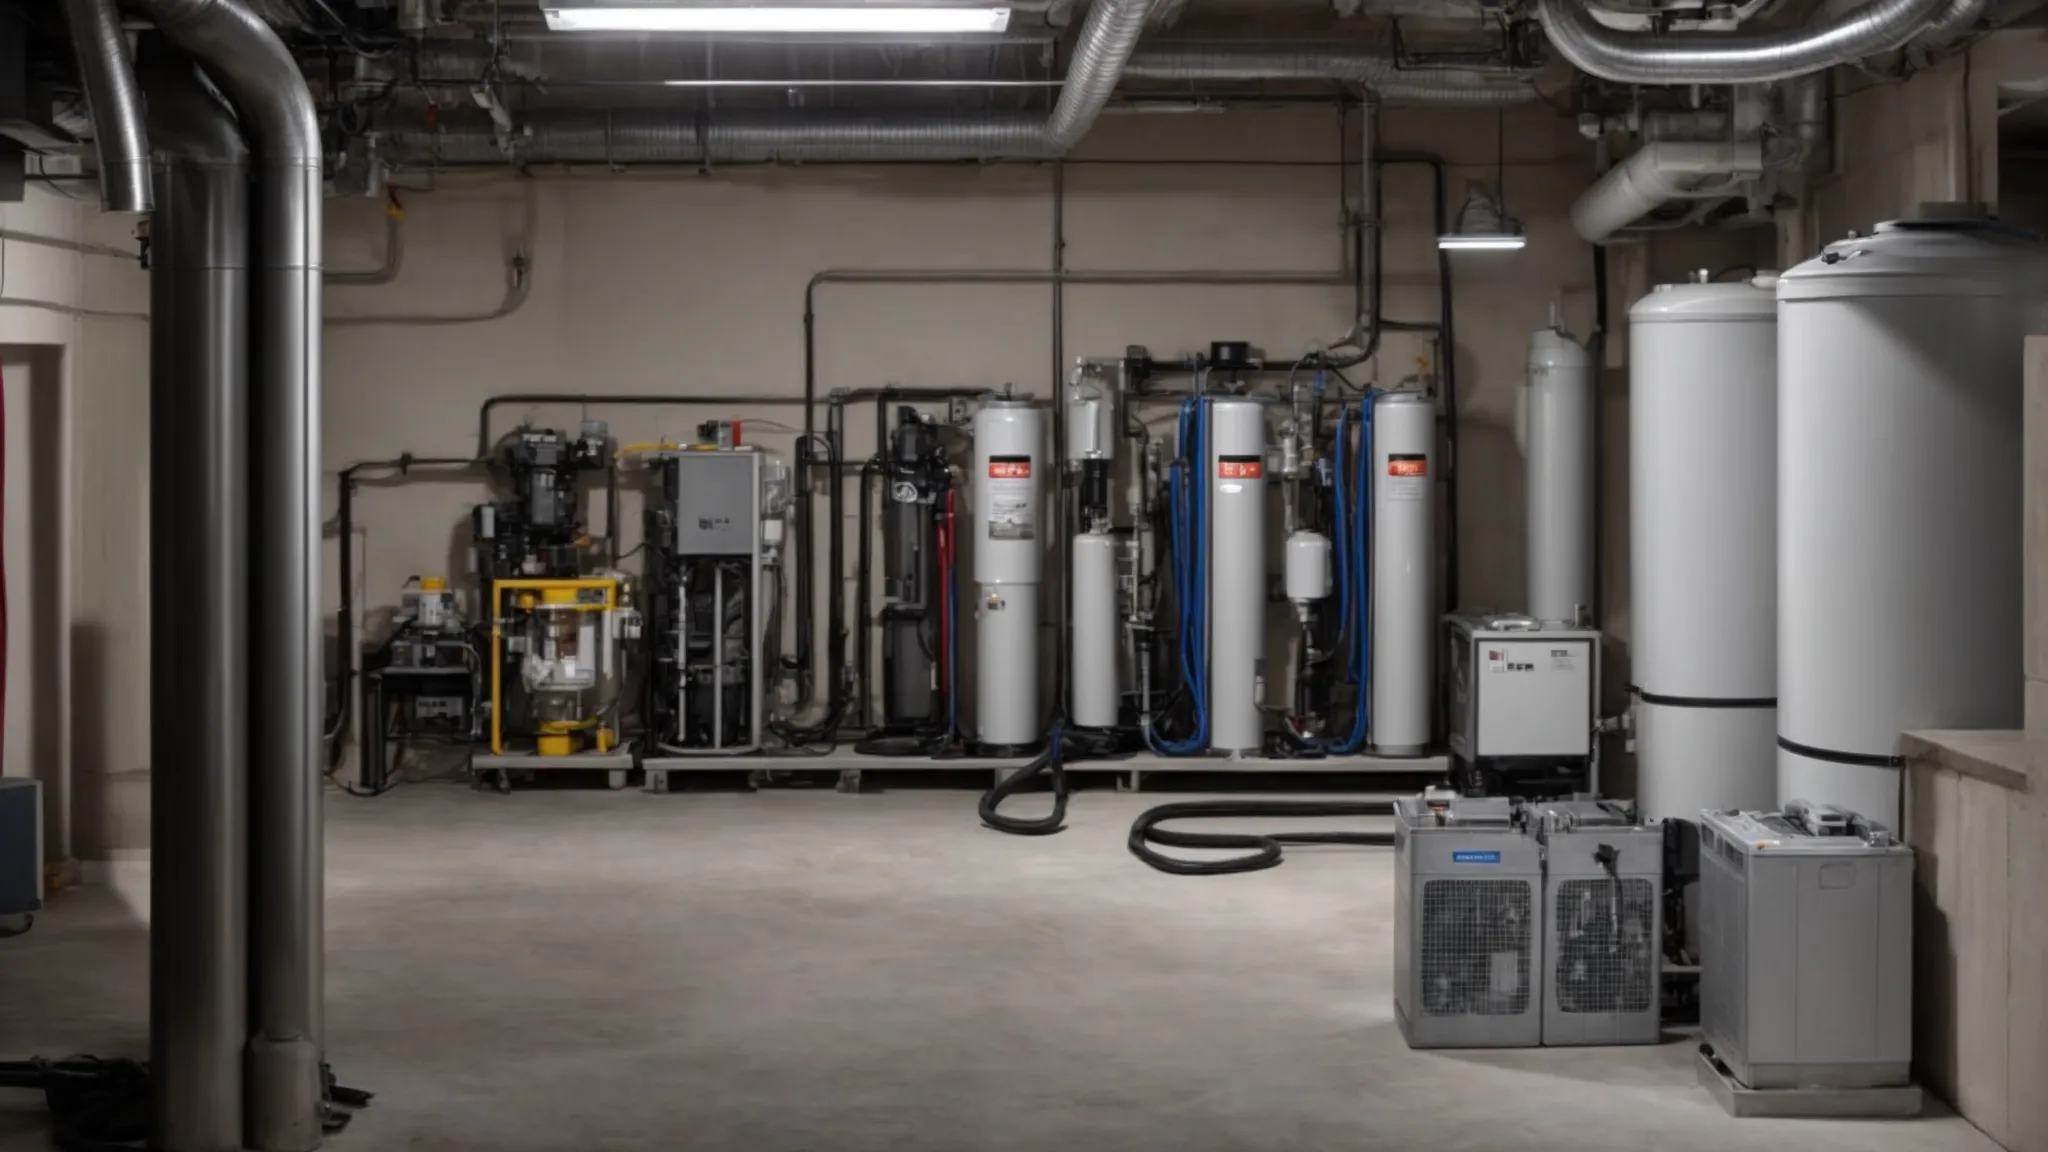 a clean, organized basement space with two large battery units connected to a central sump pump, indicating enhanced protection and reliability.